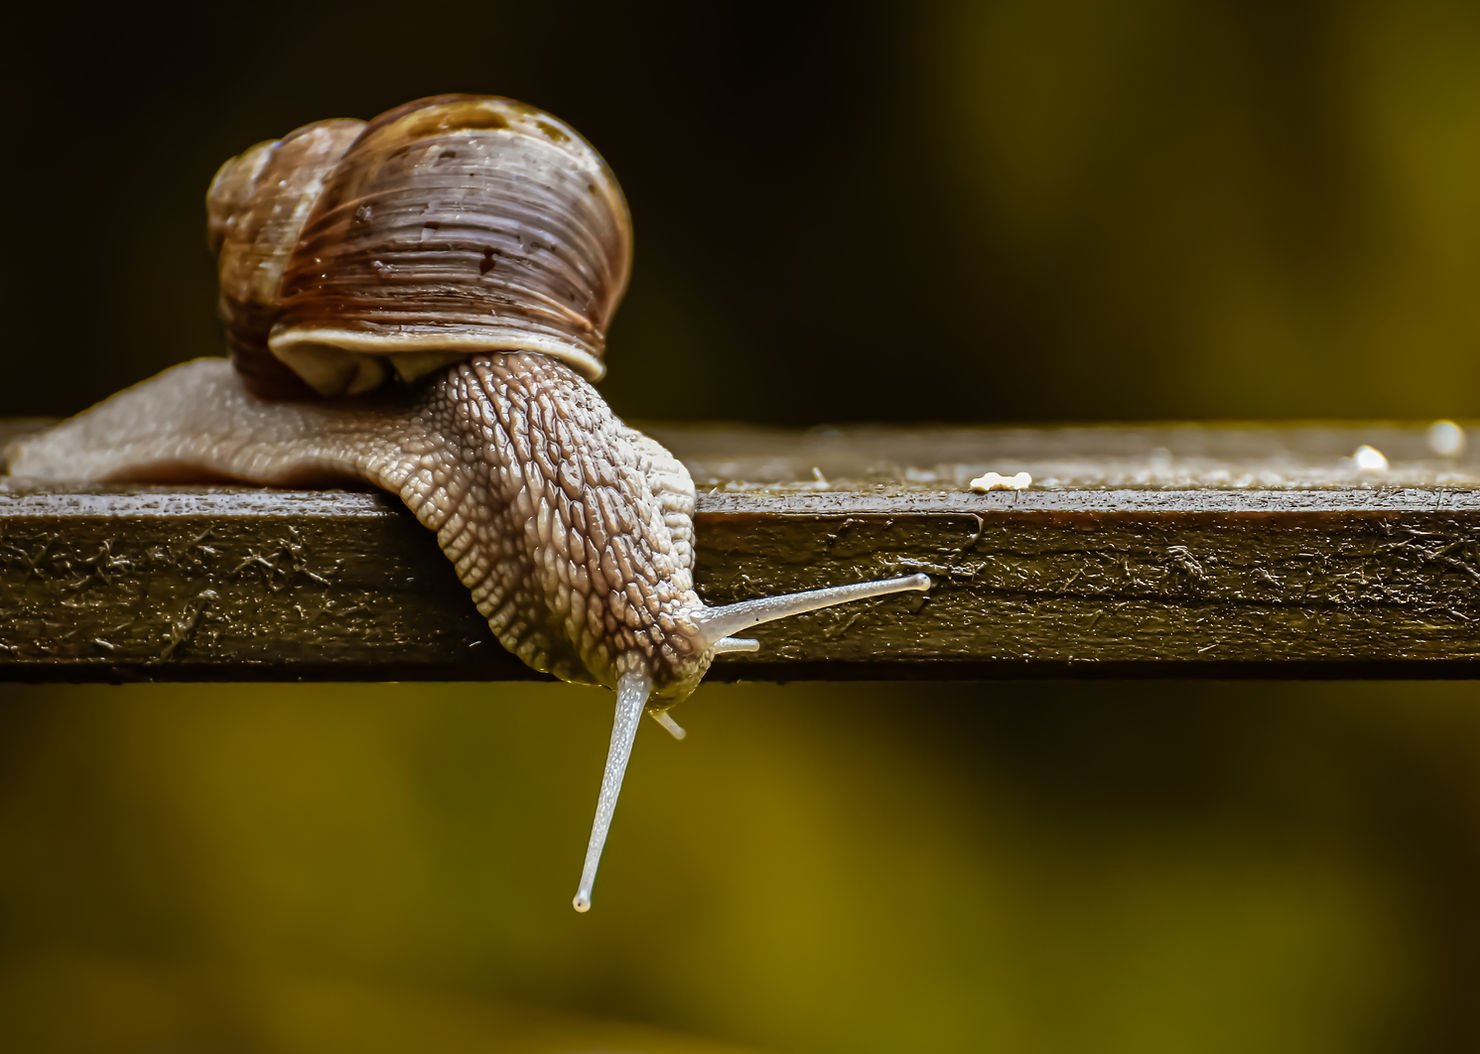 snail-can-sleep-for-more-than-3-years